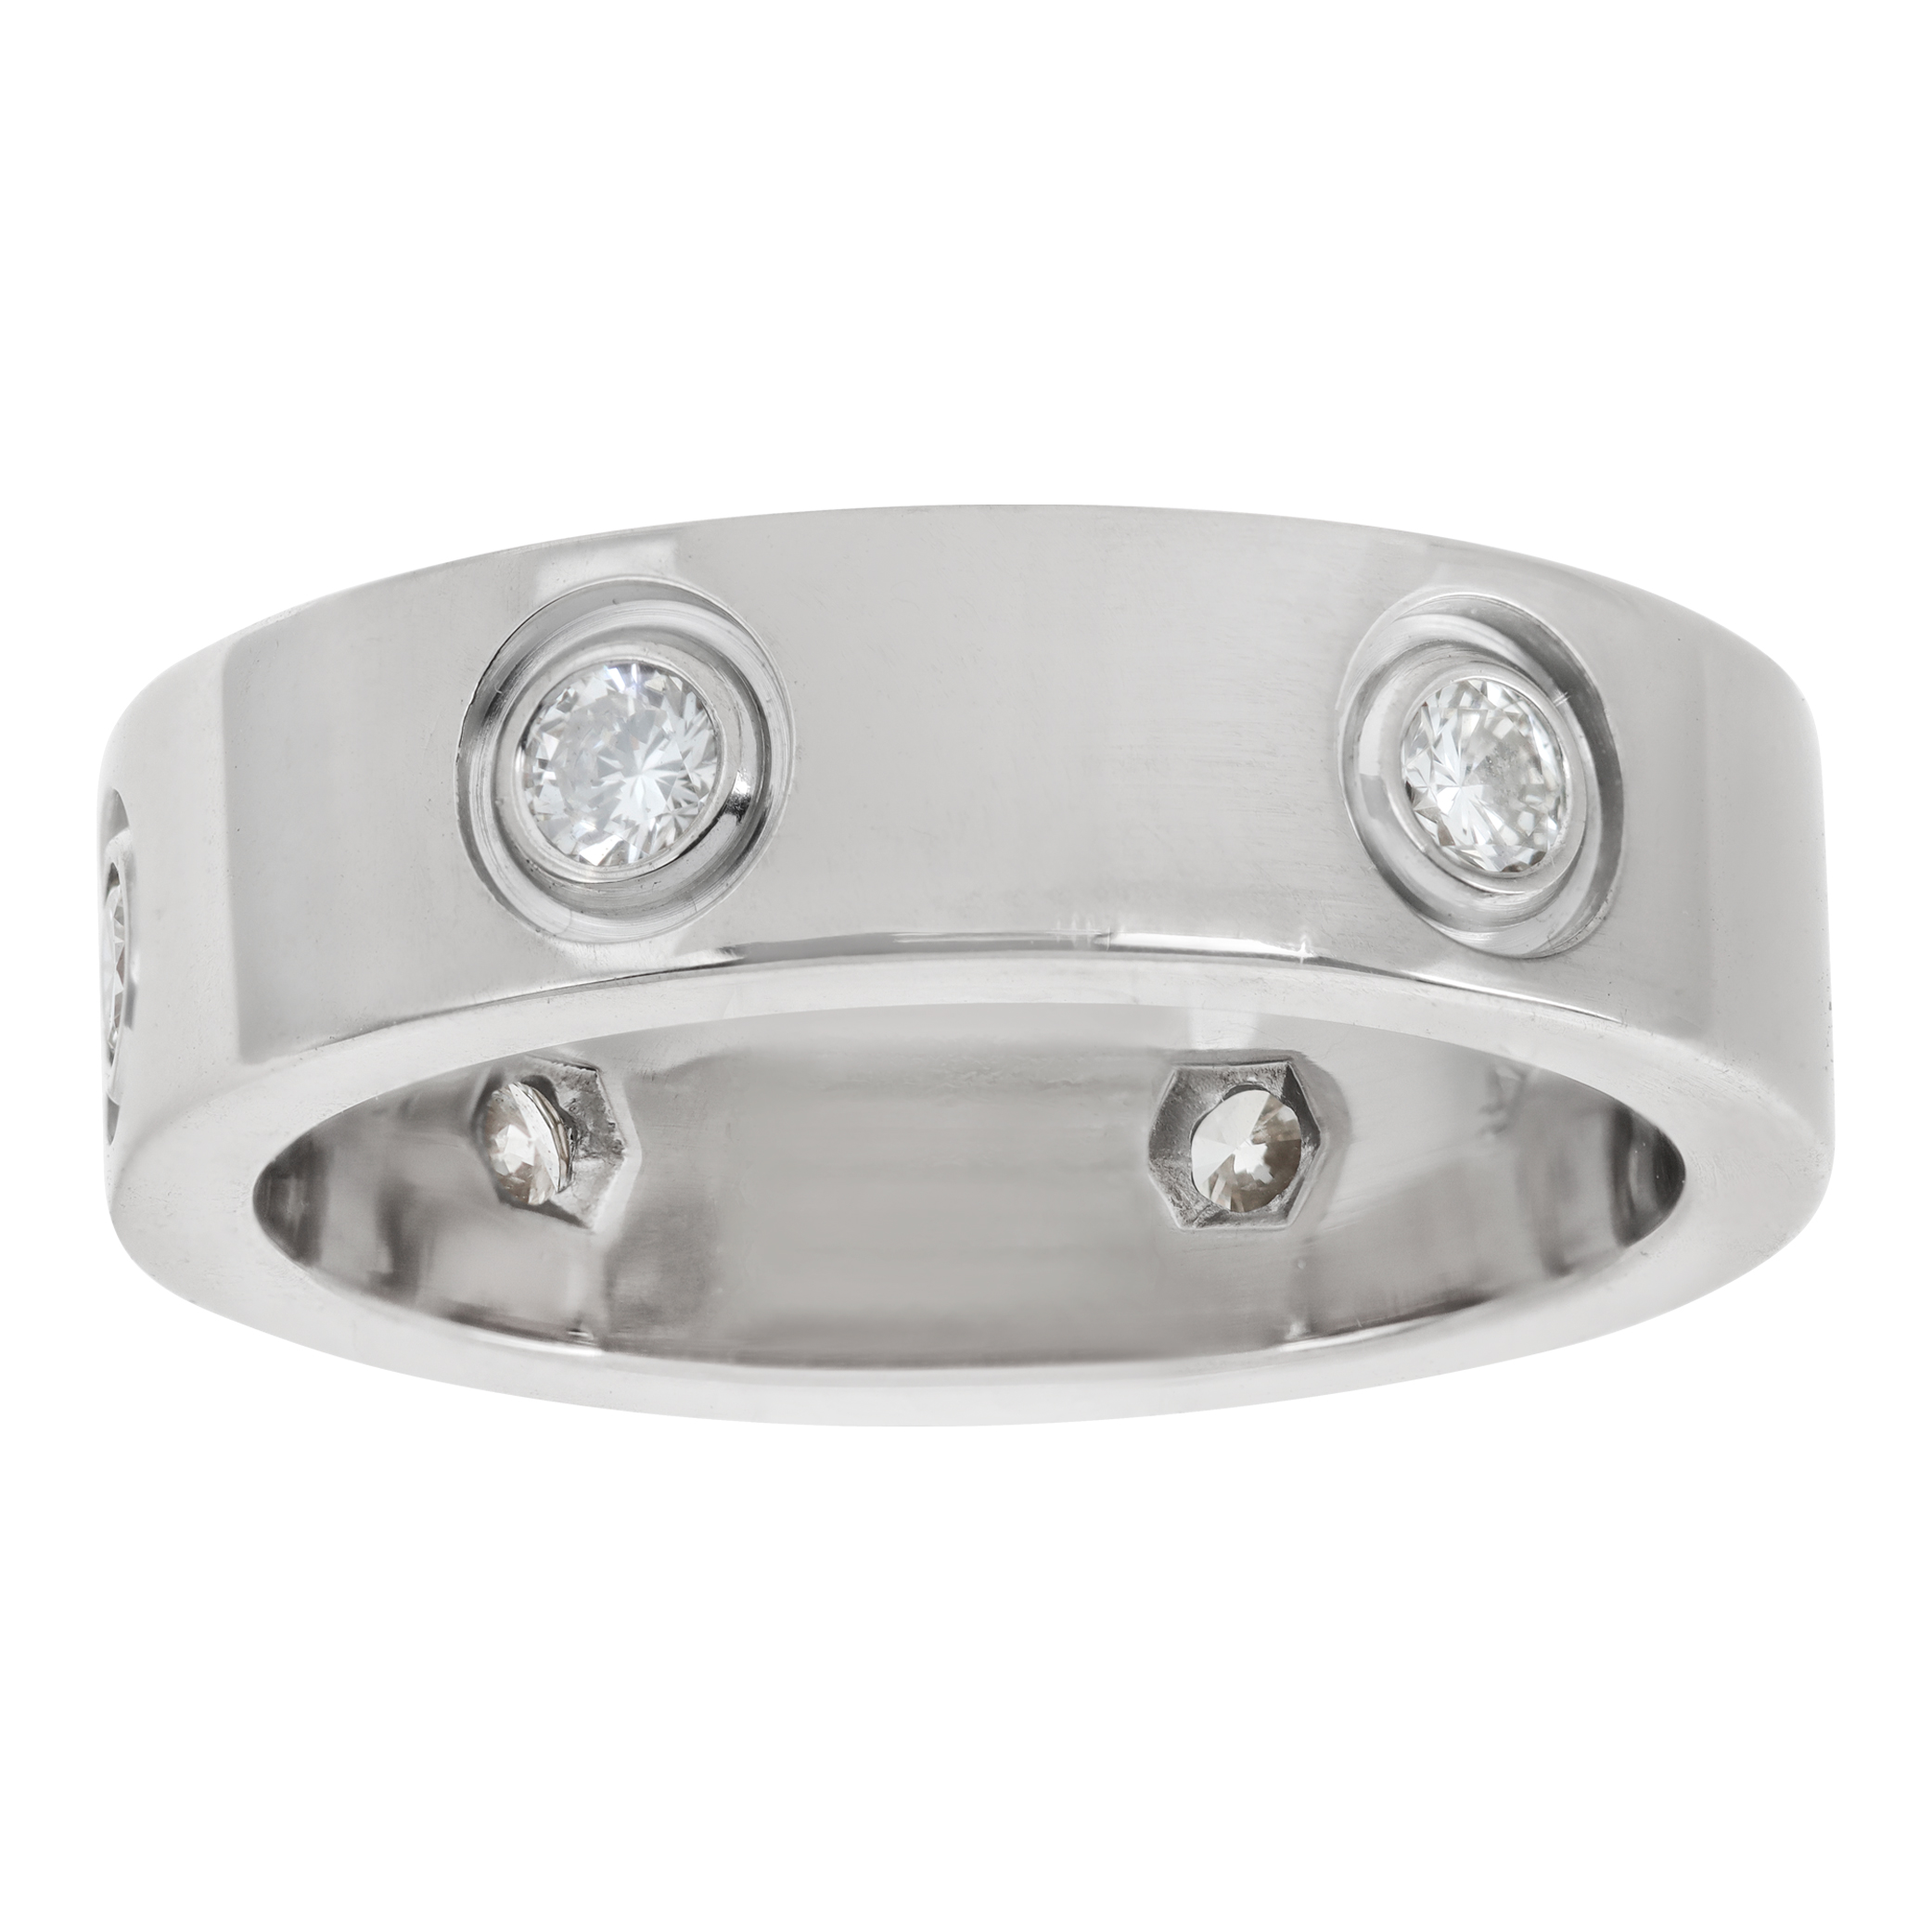 Cartier Love ring in 18k white gold with 6 diamonds, size 51 (Stones)